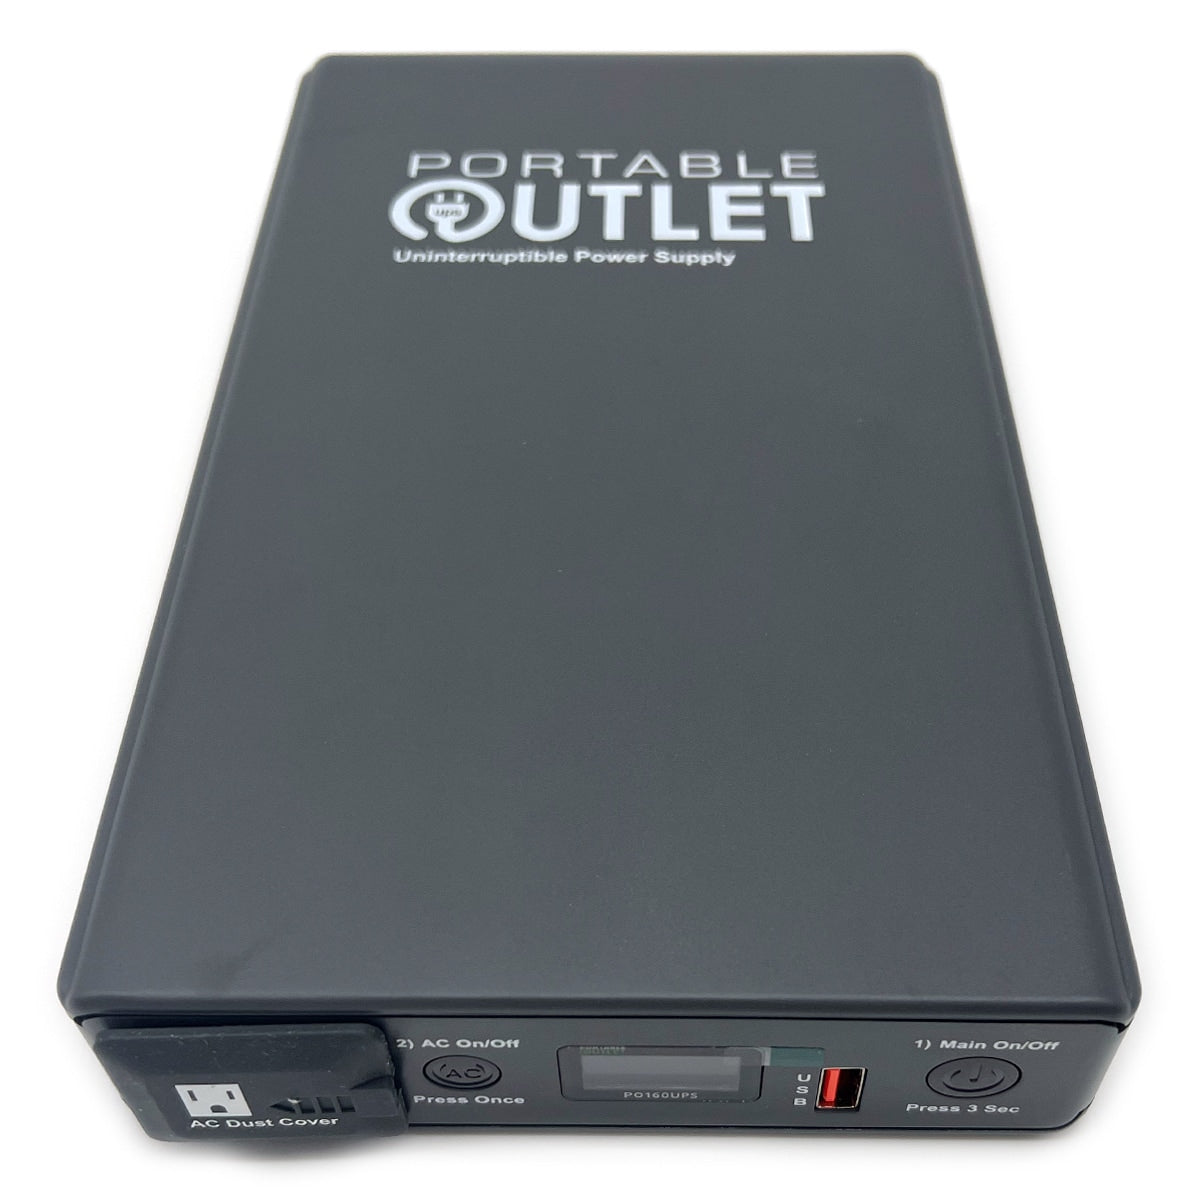 Portable Outlet UPS Battery for CPAP & BiPAP Machines